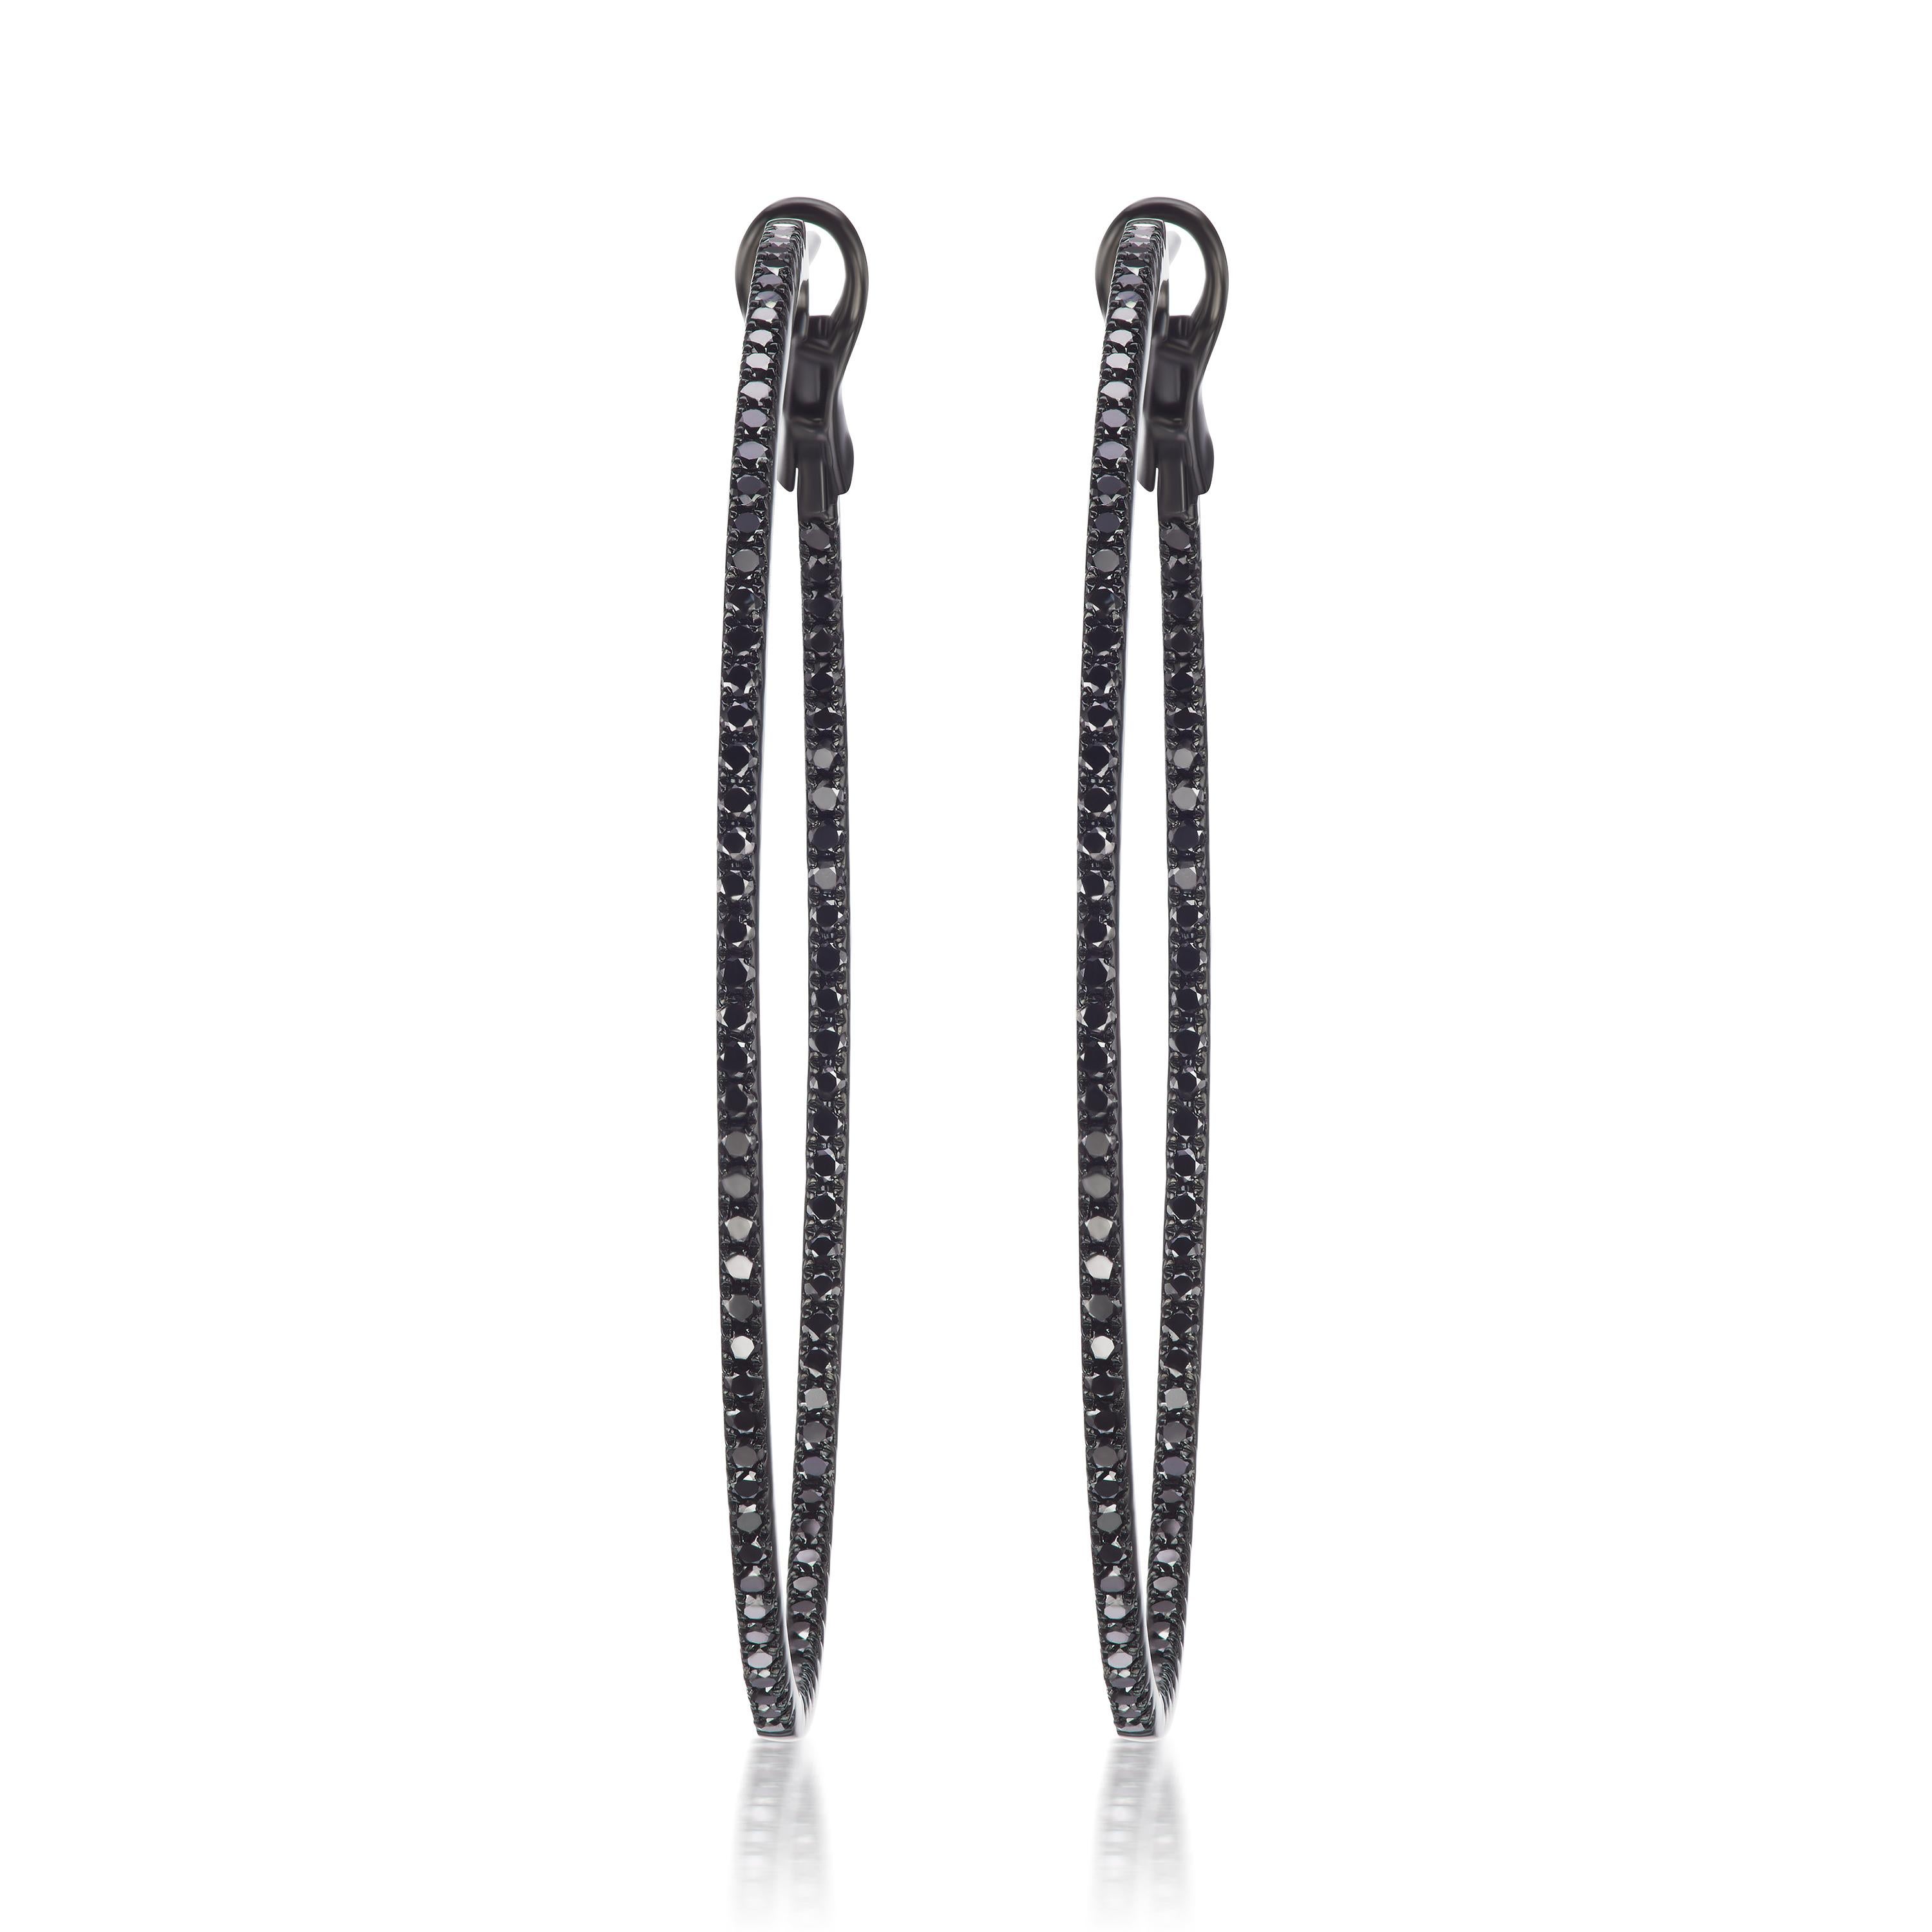 Bold meets sparkle. These hoops are featured with sparkling 172 pave black diamonds set in 18 Karat gold. These hoops come with omega backs.

JEWELRY SPECIFICATION :
Approx. Gold Weight : 8.24 grams
Approx. Diamond Weight : 1.52 carats.
Diamond